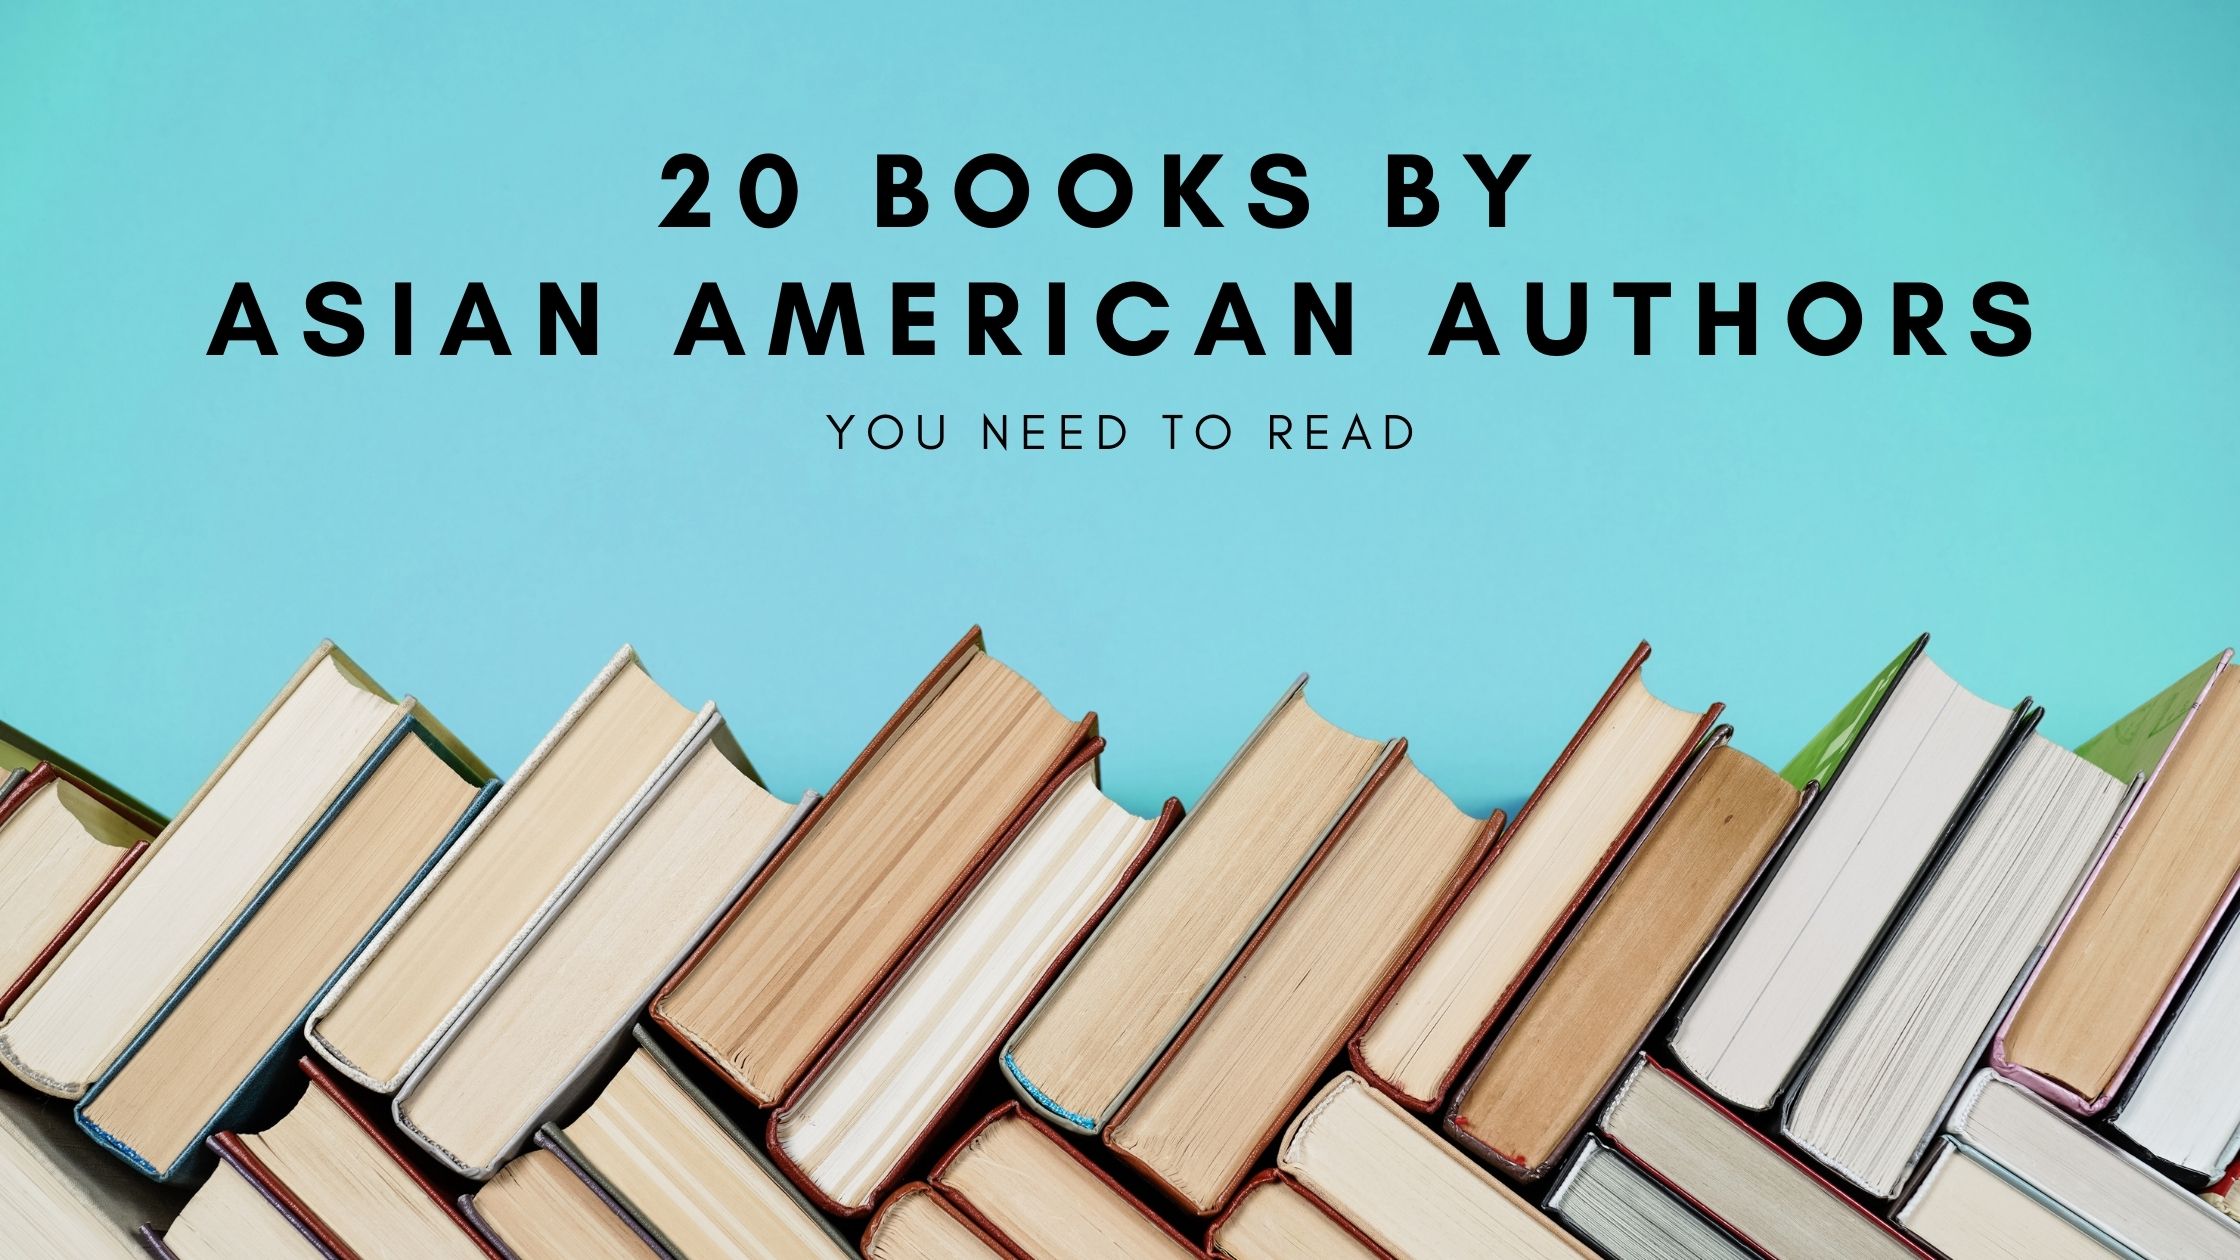 books at a diagonal angle line the bottom of the graphic '20 books by Asian American Authors' reads above the line of books